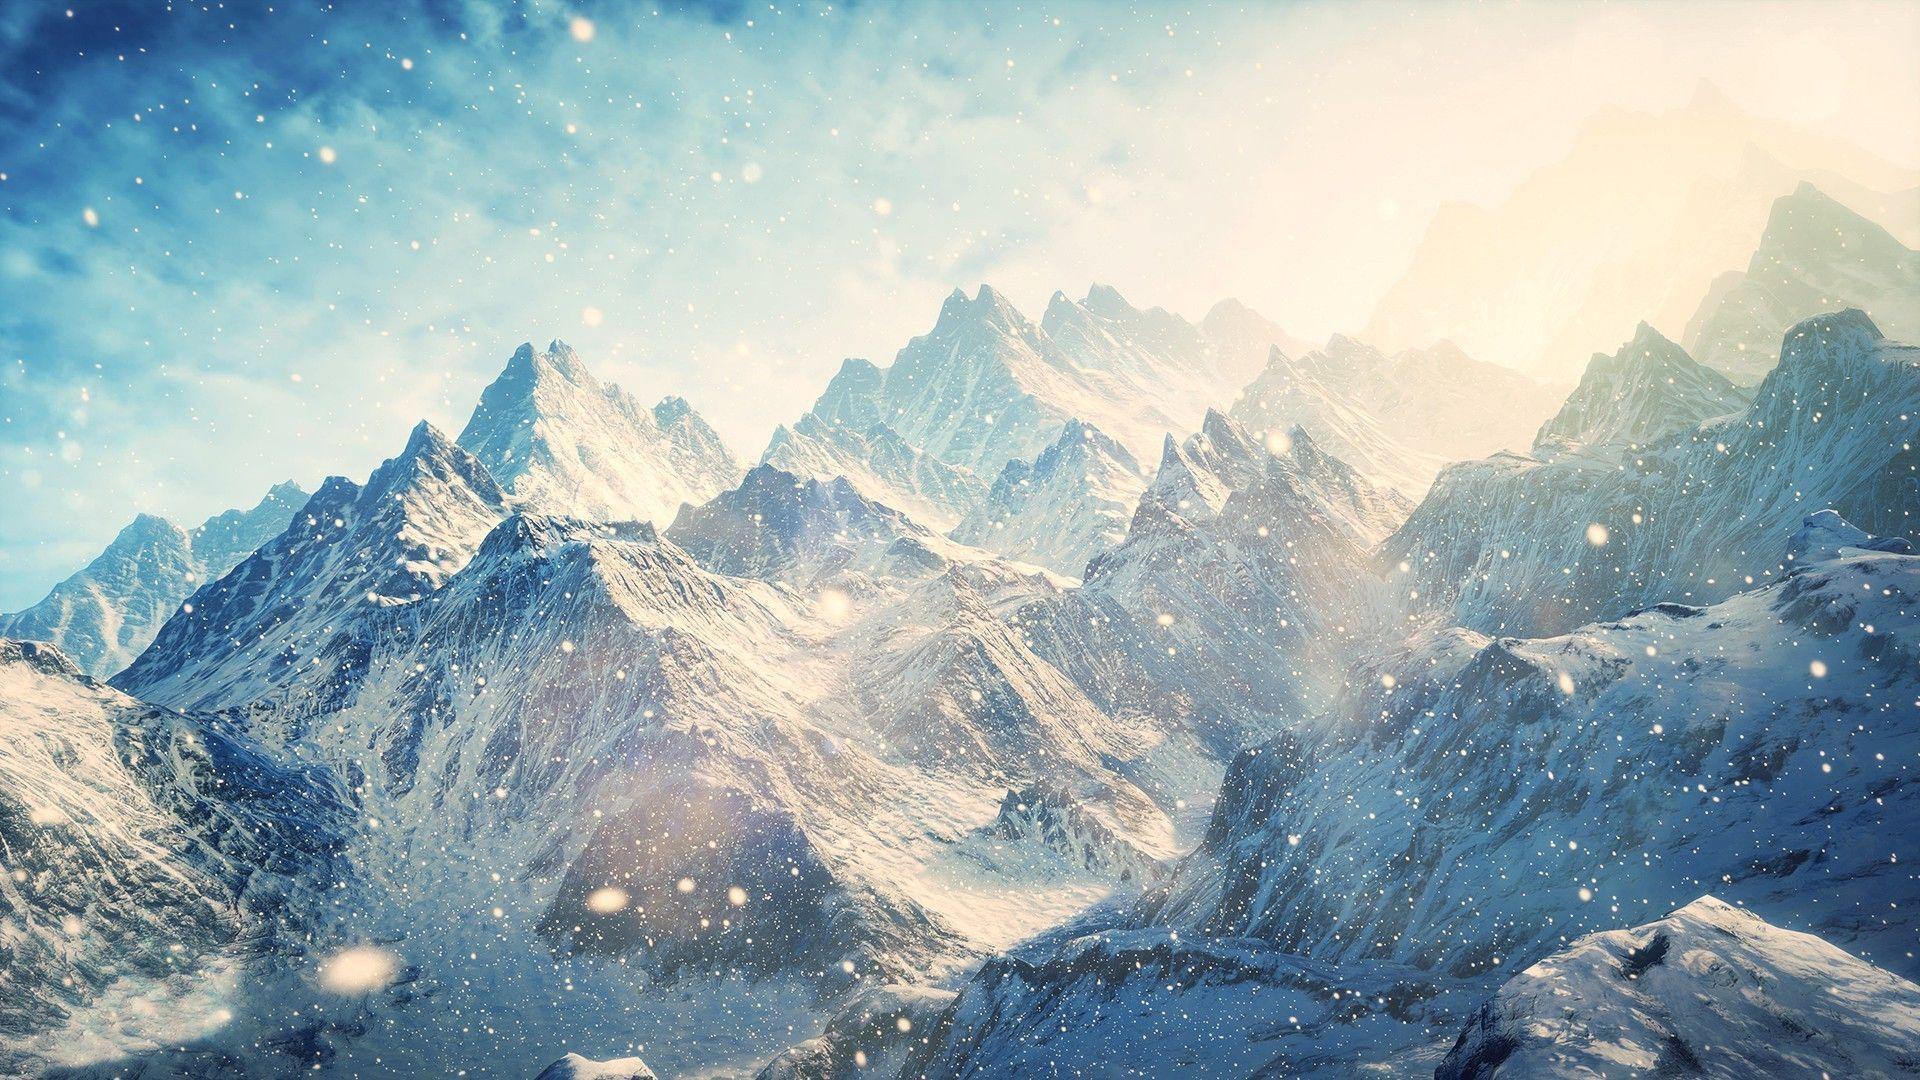 Wallpapers For > Snow Mountain Wallpapers Widescreen